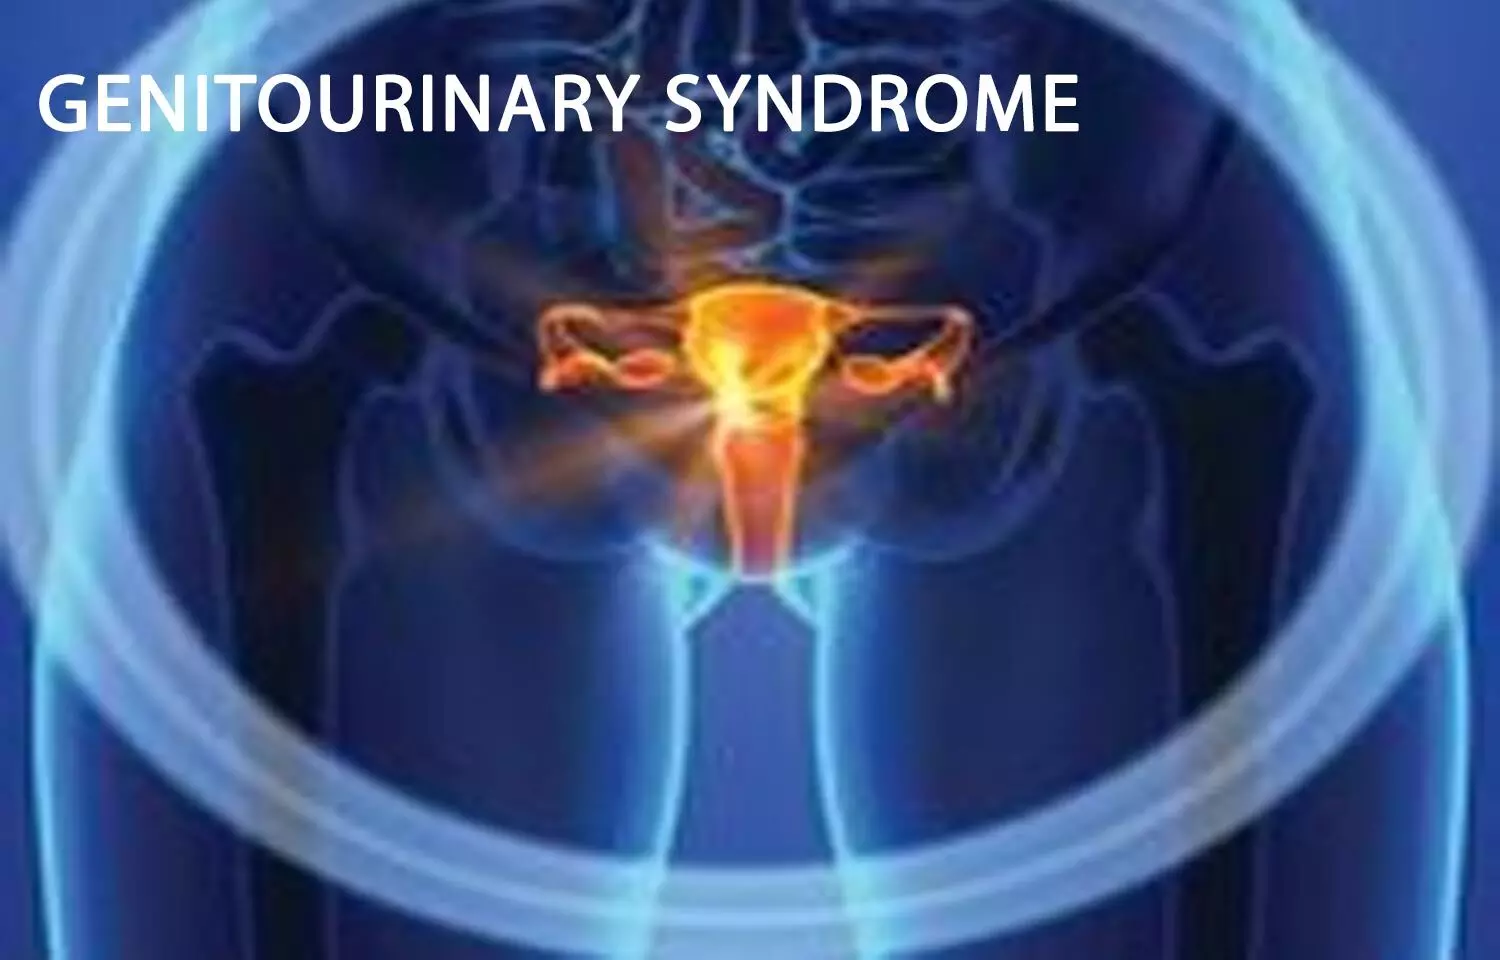 New Position Statement on Genitourinary syndrome released by NAMS